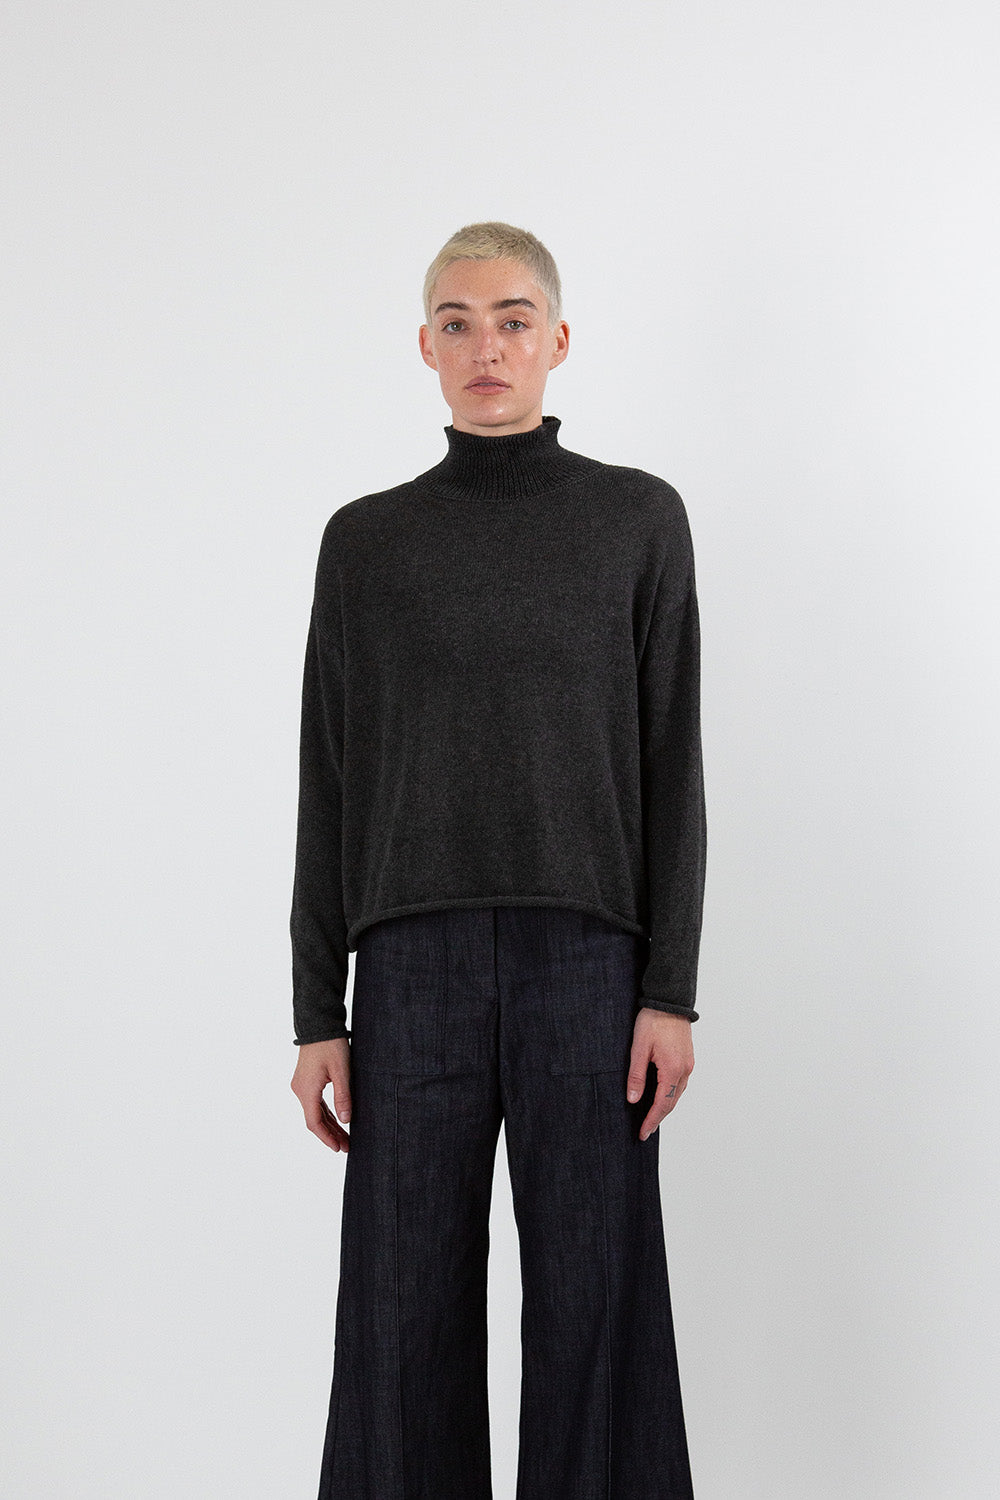 Pima Cotton Turtleneck in Charcoal